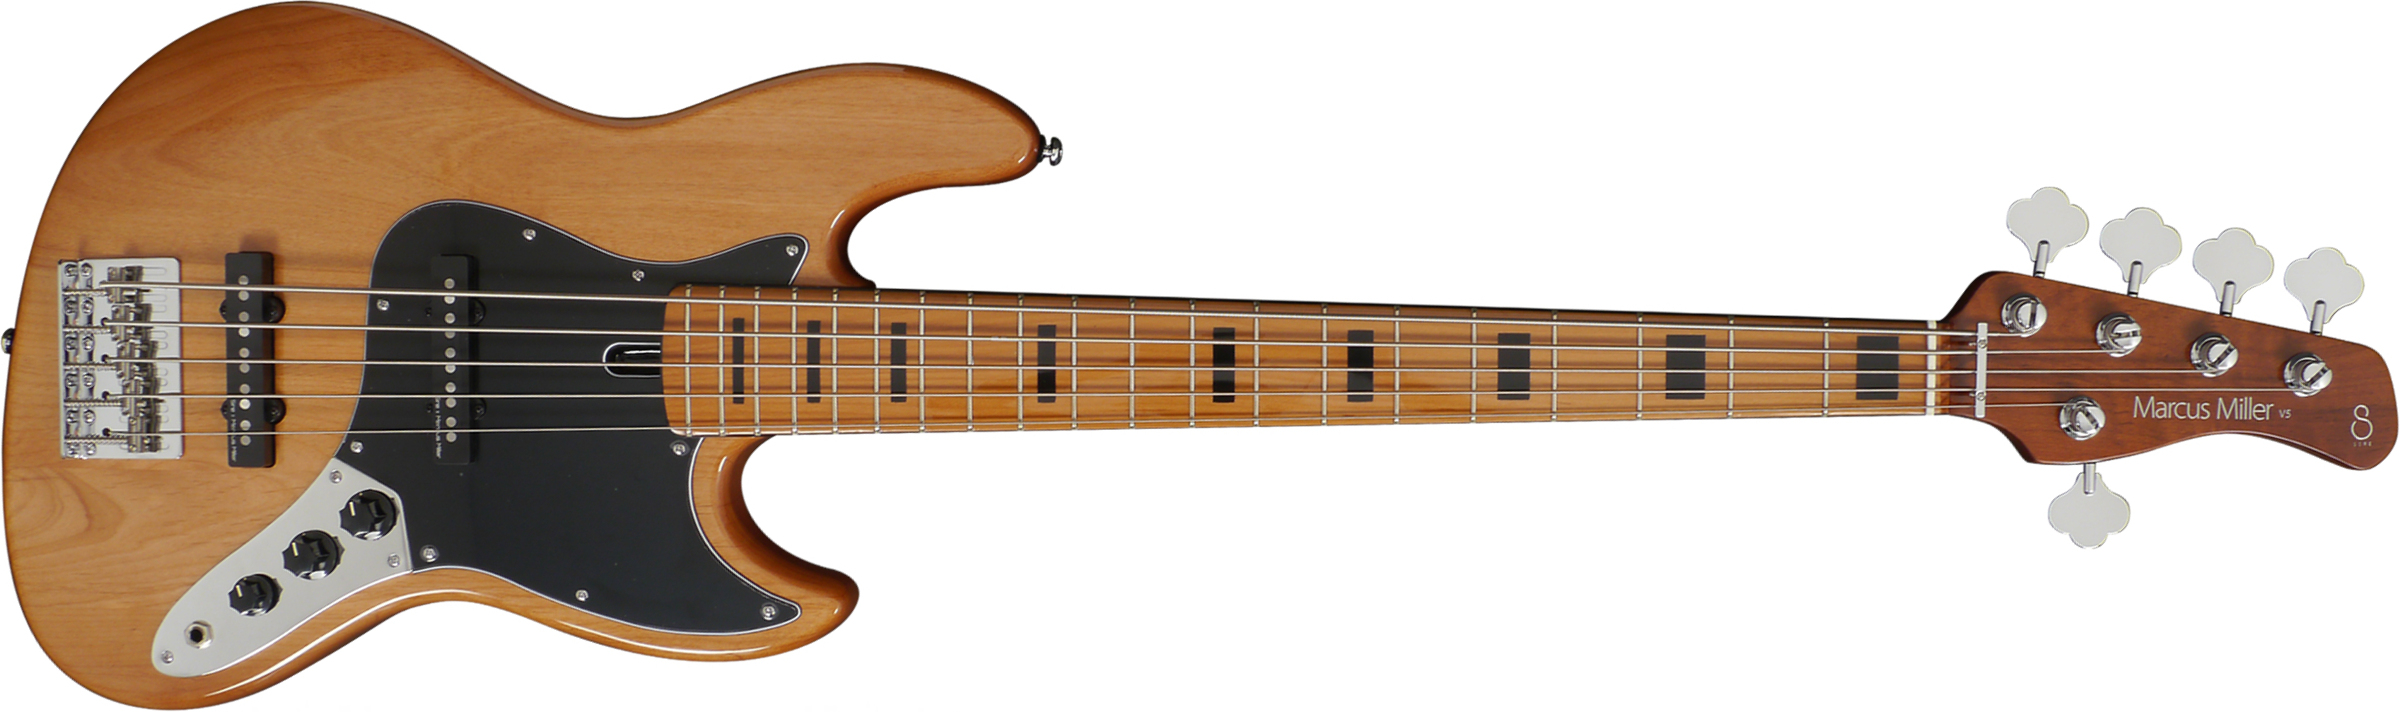 Marcus Miller V5 Alder 5st Mn - Natural - Solidbody E-bass - Main picture